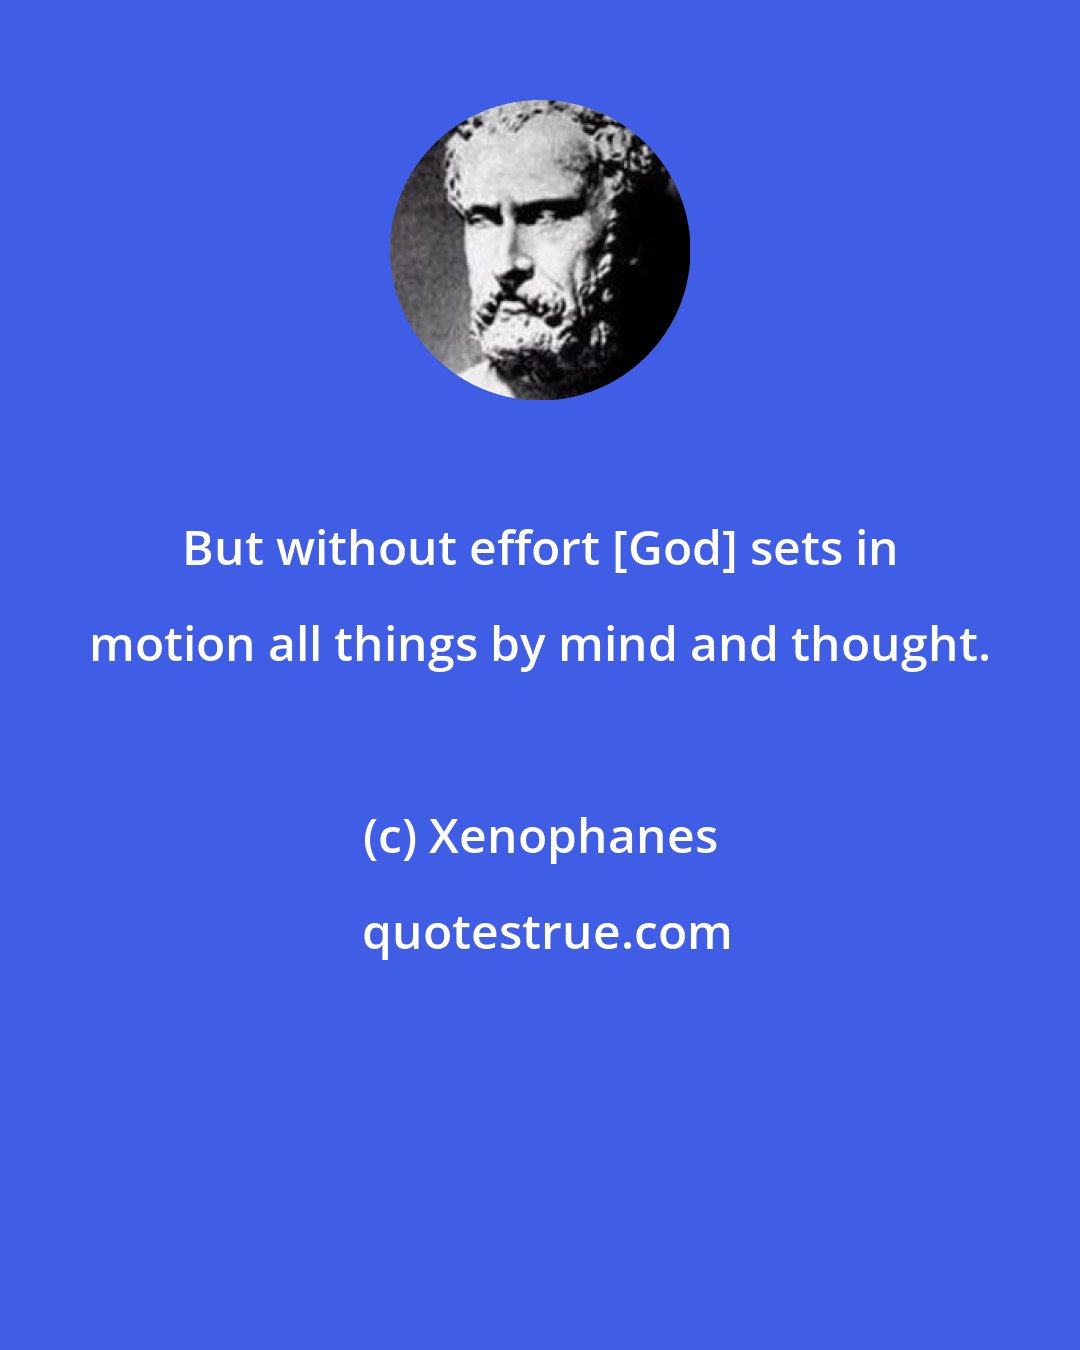 Xenophanes: But without effort [God] sets in motion all things by mind and thought.